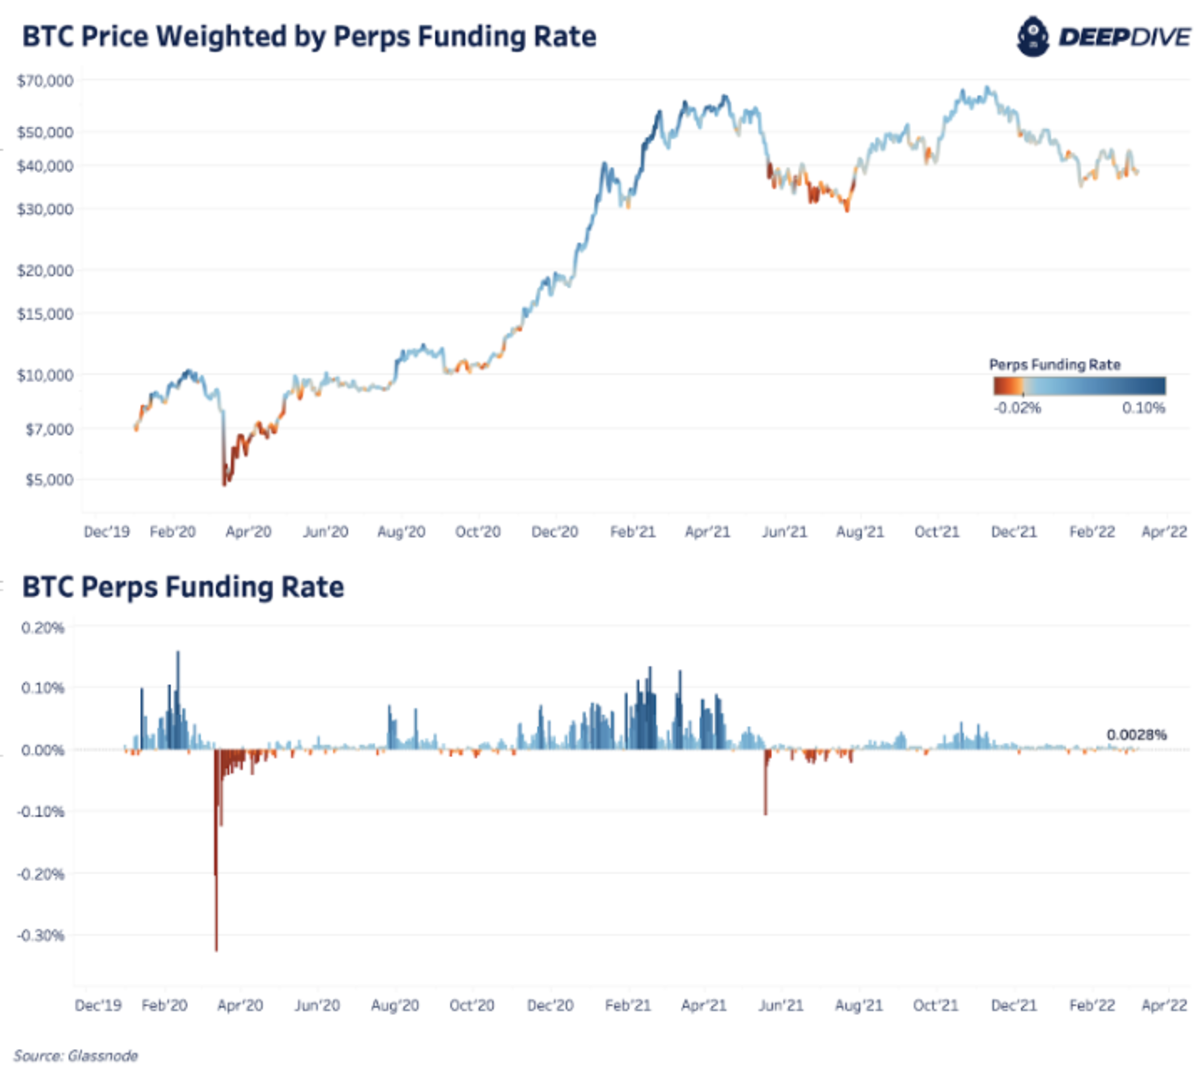 Analyzing bitcoin derivatives data makes it clear that market participants are cautious in this period of uncertainty.